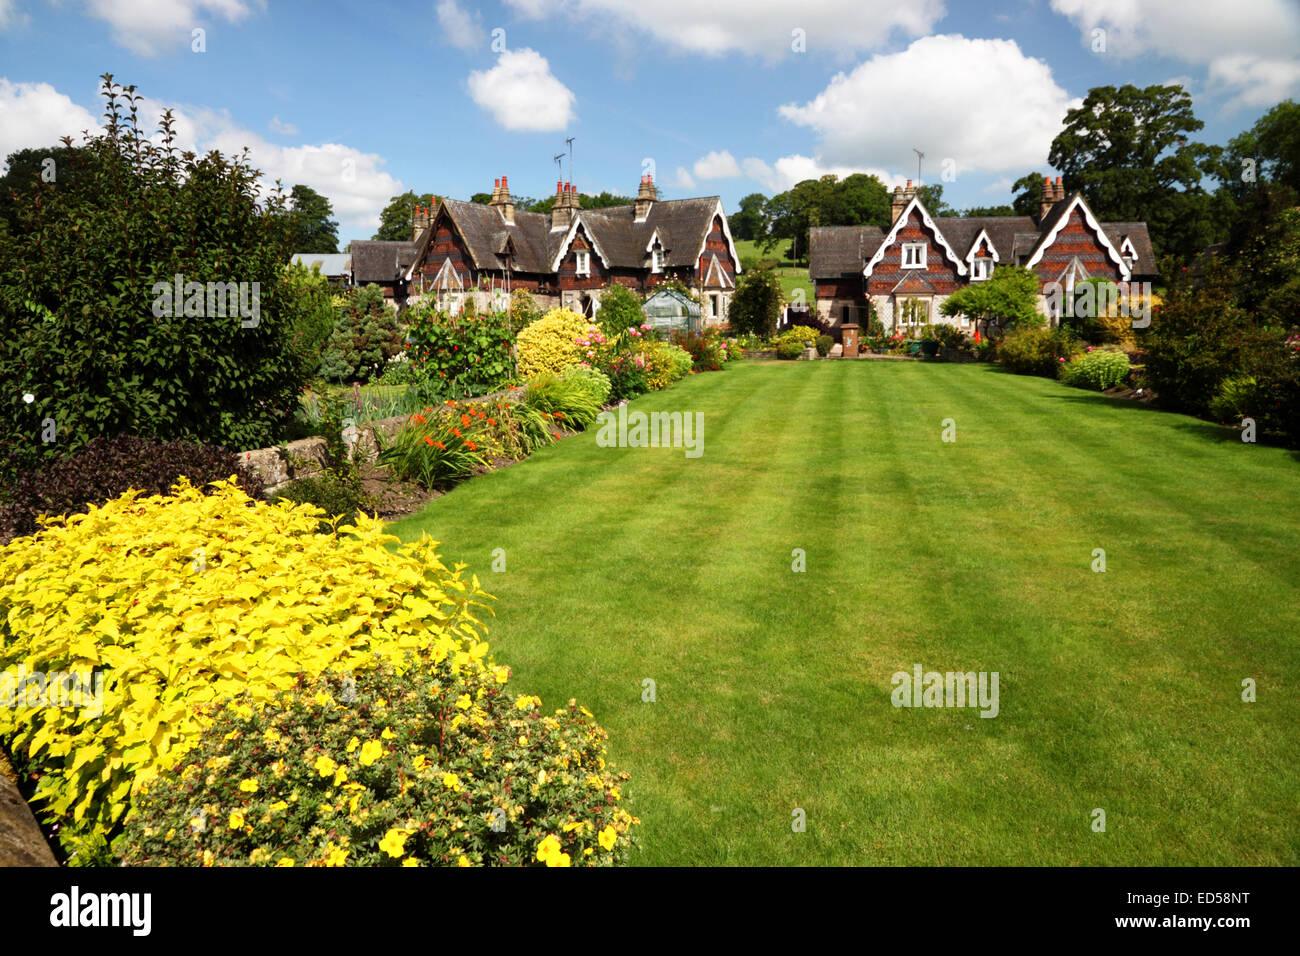 an english cottage garden with a wide lawn, yellow flowers and stock